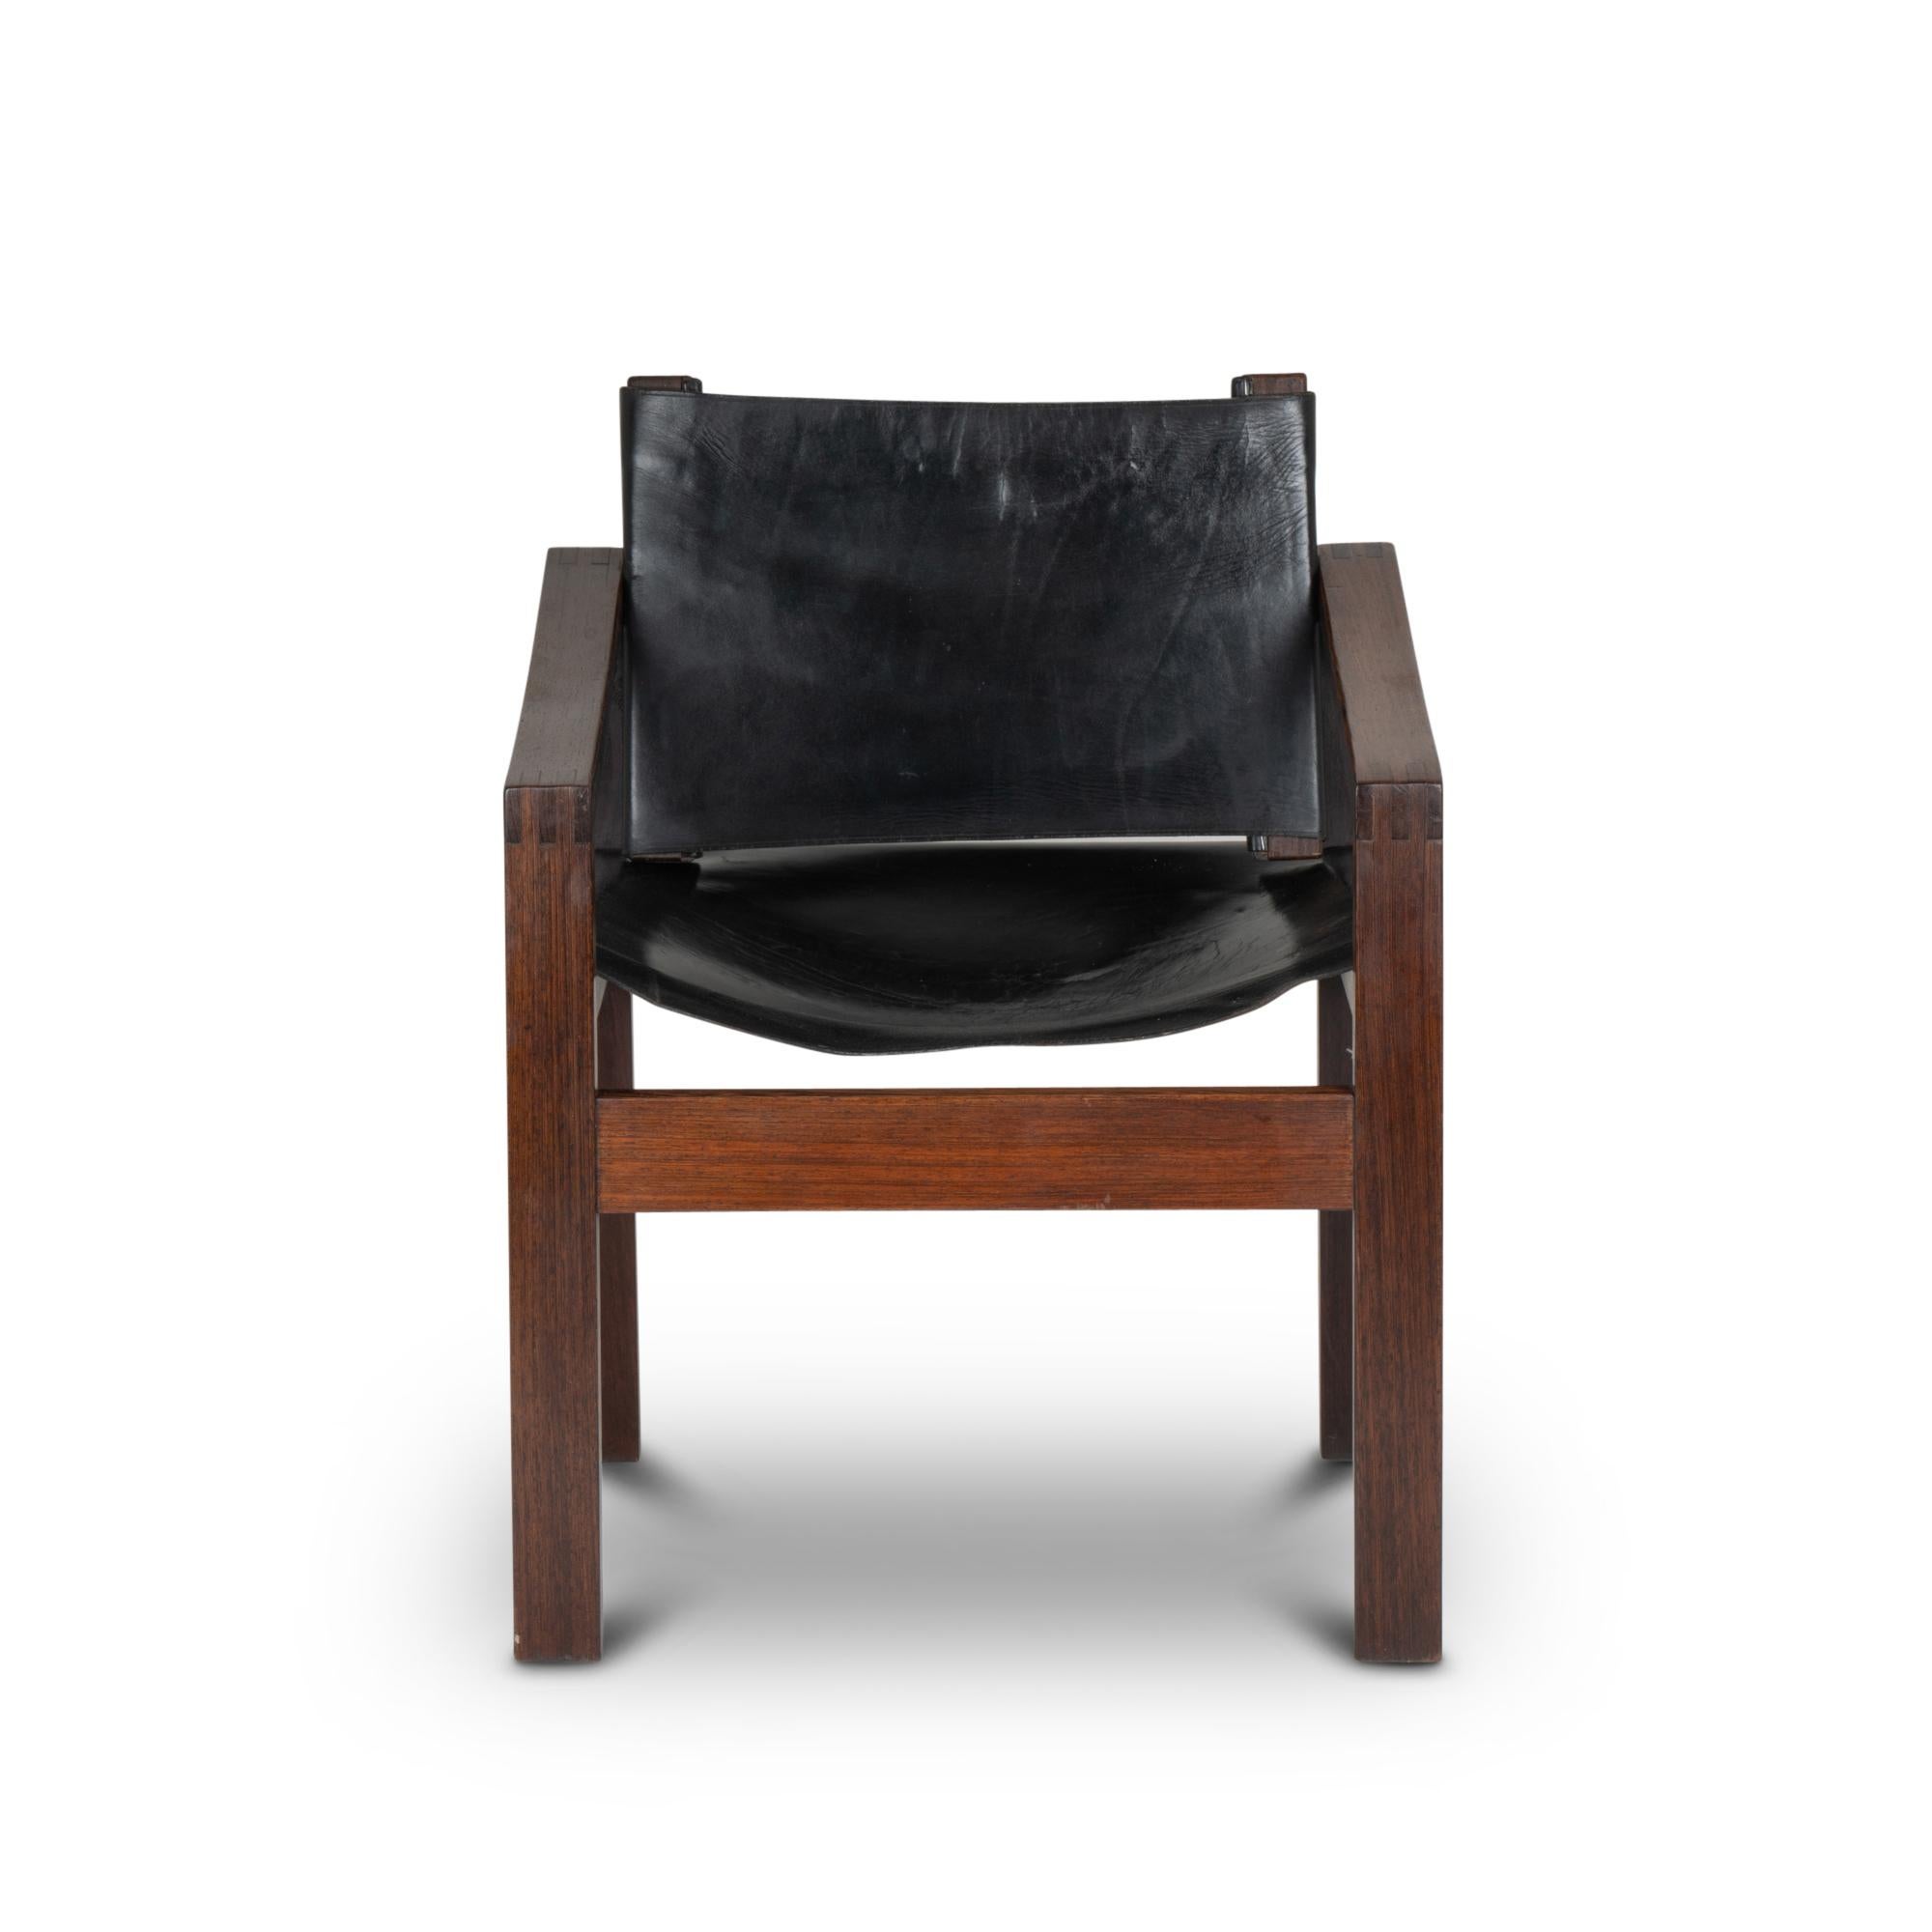 Armchair in rosewood, rectangular shape. Seat and back in black leather, the back being slightly curved.

Work realized in the 1970s.